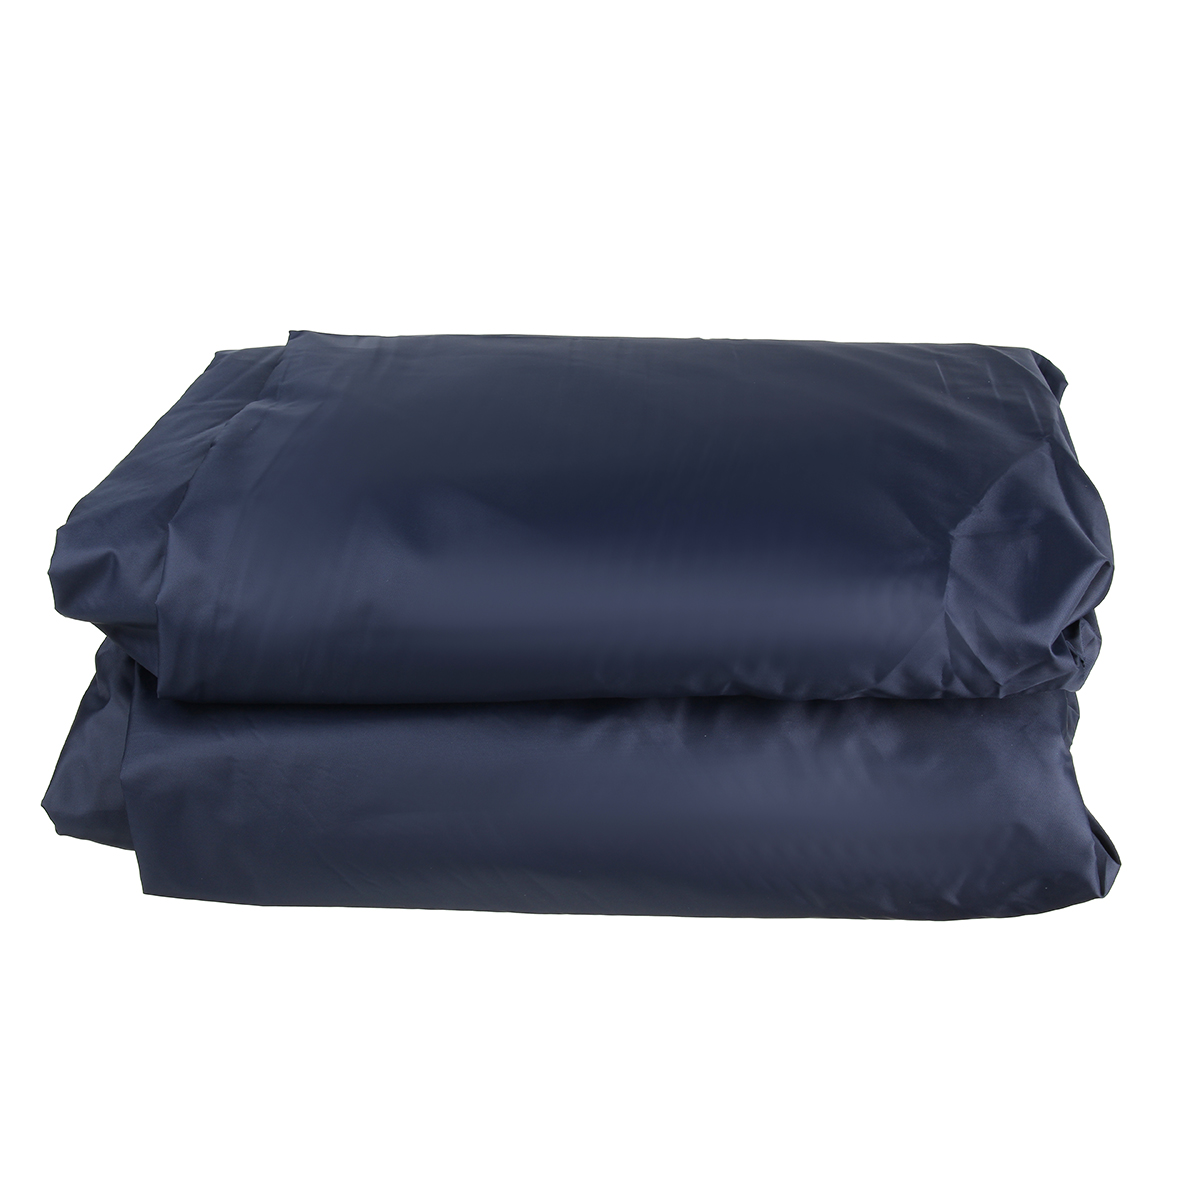 XXL 5.3X2X1.9M 210T Single Layer Waterproof Full Car Cover Outdoor Dust-Proof Sunscreen Rain and Snow for SUV - Auto GoShop